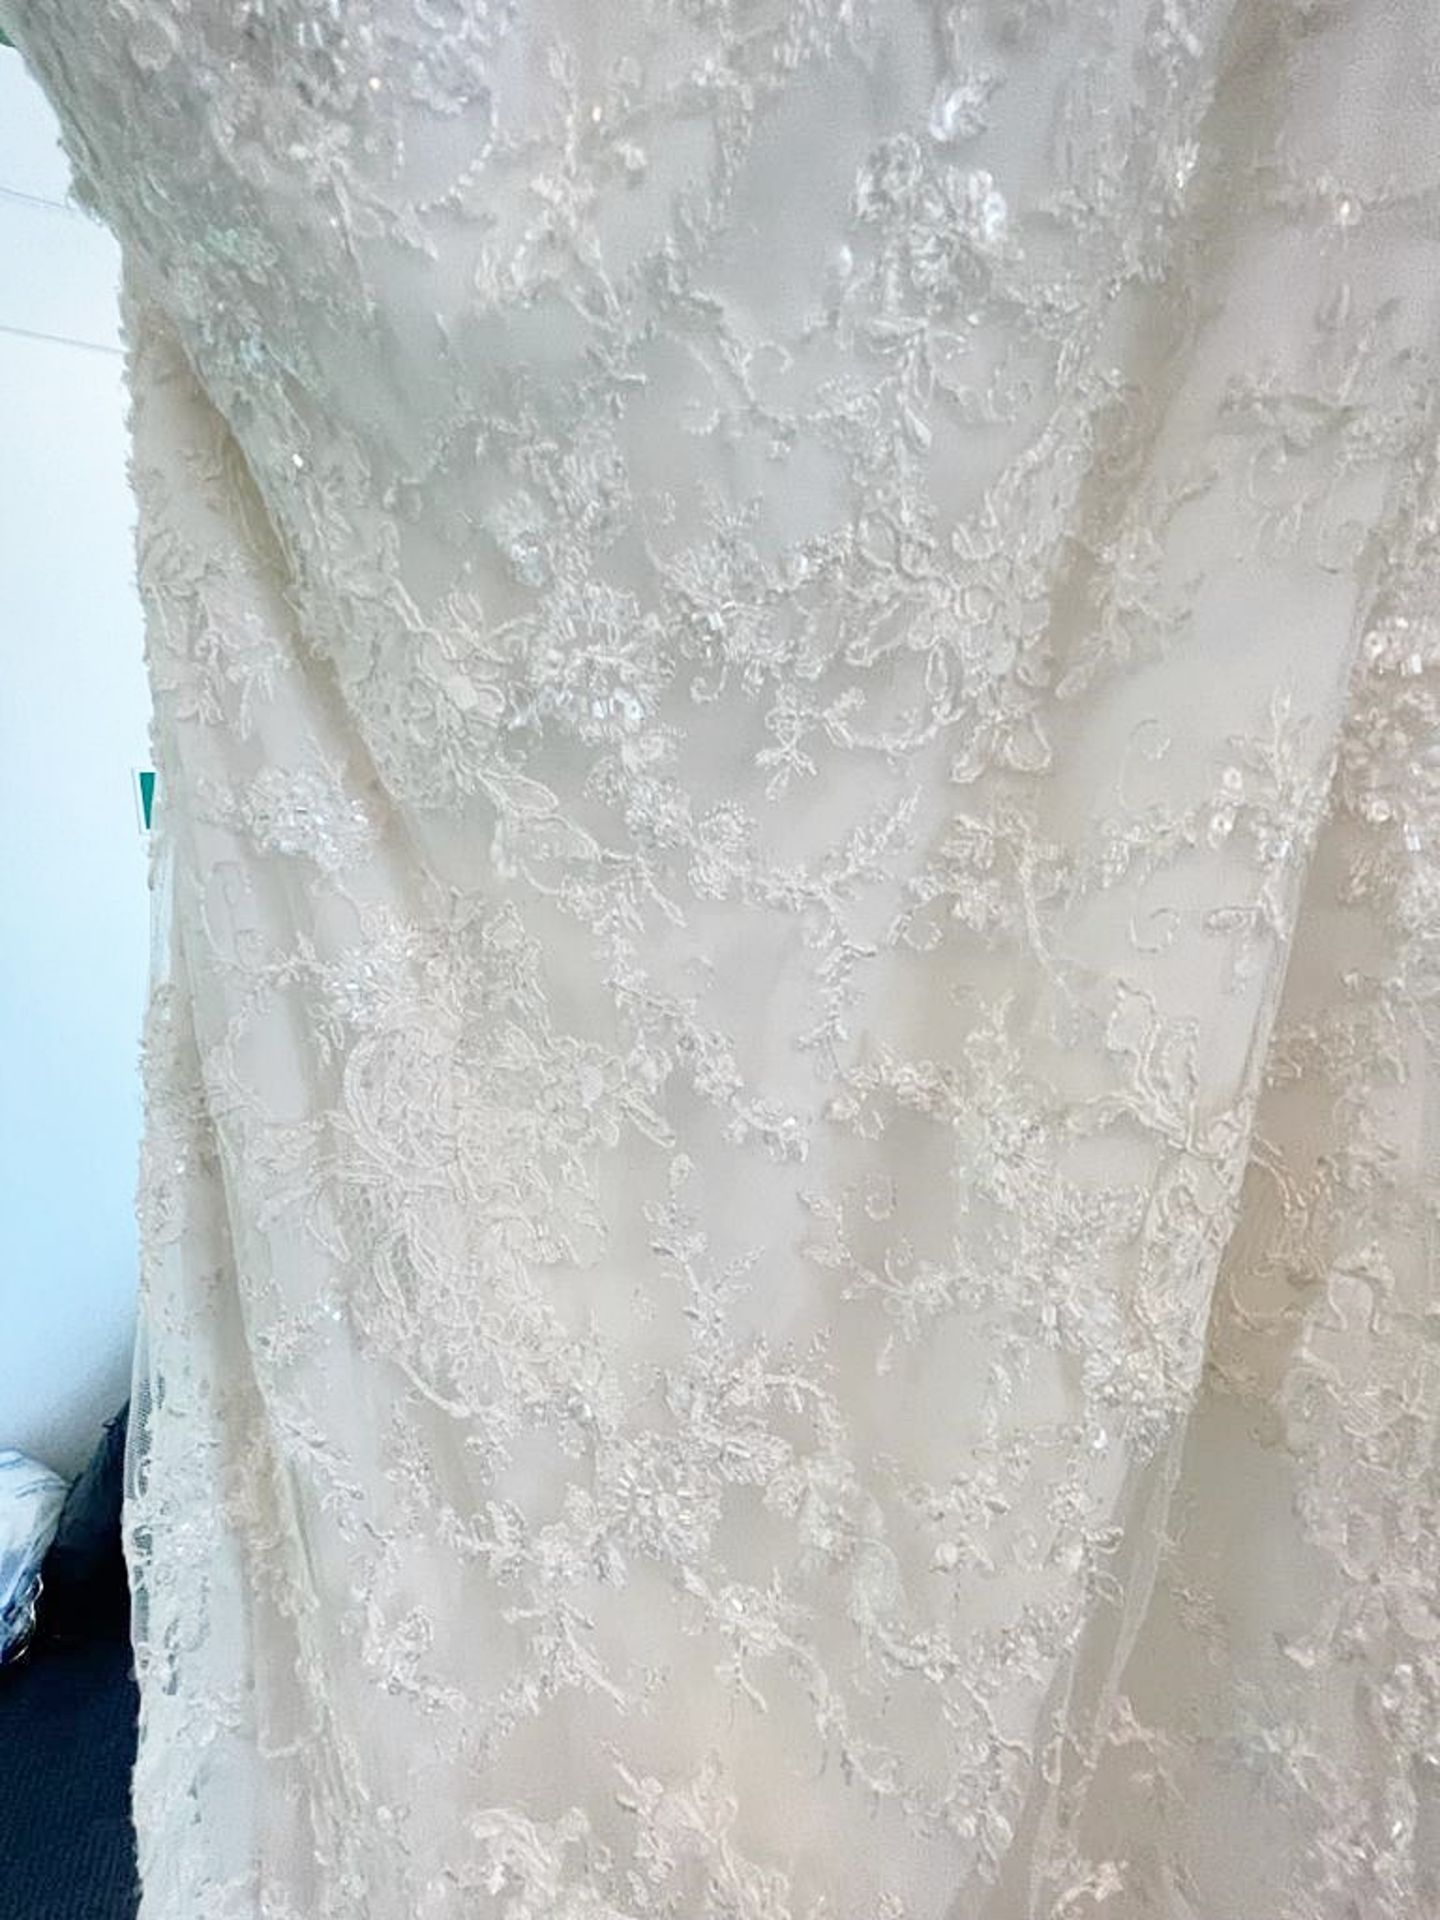 1 x LUSAN MANDONGUS 'Lorelle' Fishtale Designer Wedding Dress Bridal Gown, With Chantilly Lace - Image 8 of 12